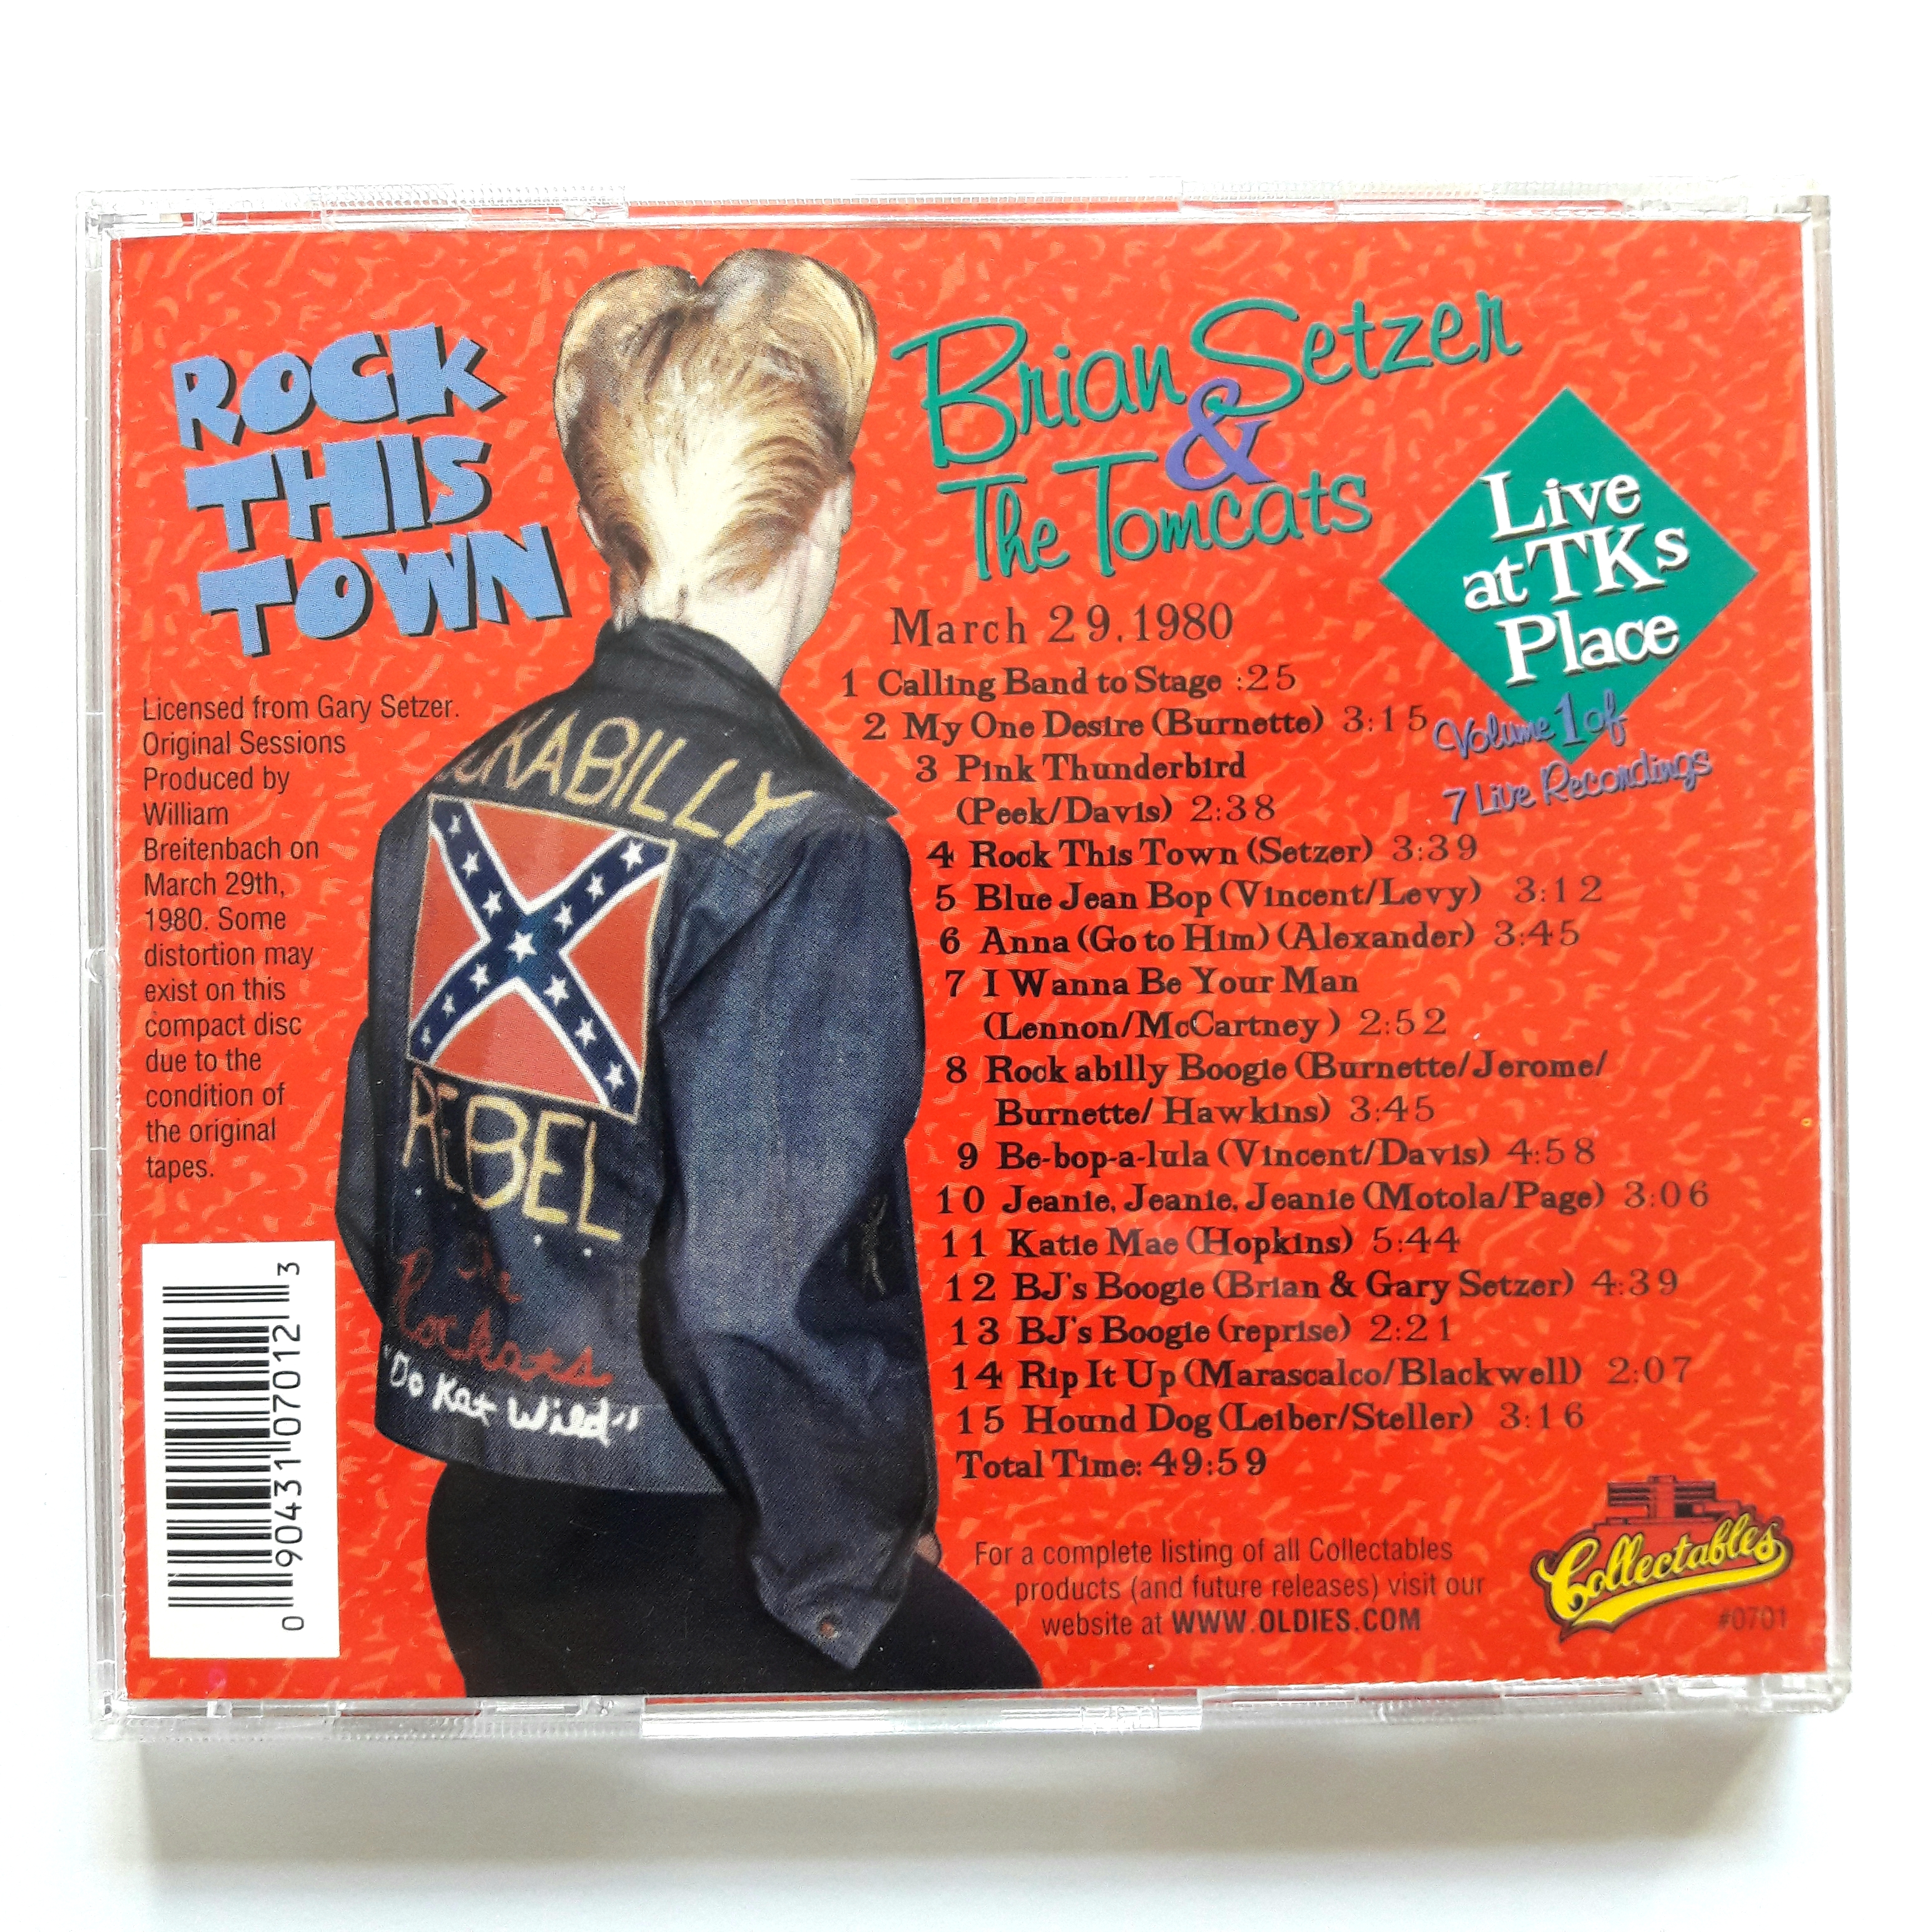 Brian Setzer & The Tomcats - Rock This Town